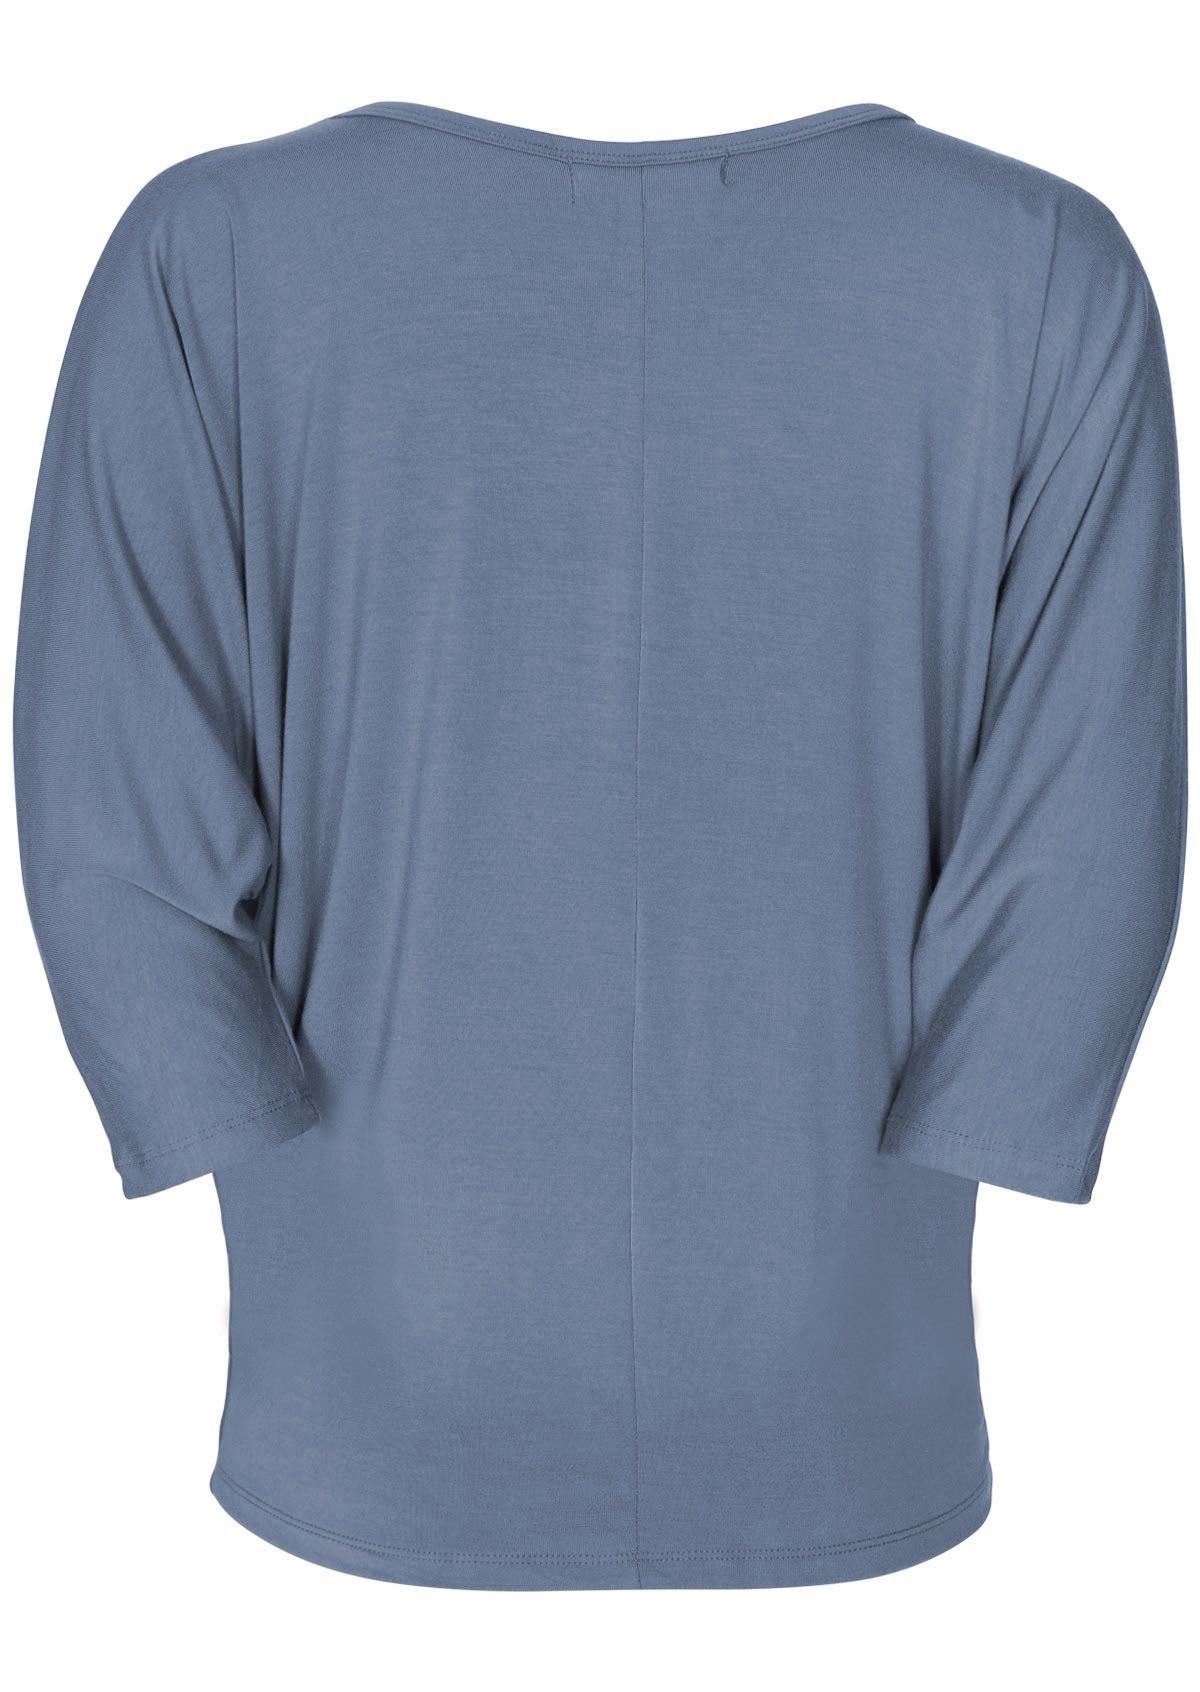 Back view of women's 3/4 sleeve rayon batwing v-neck grey top.